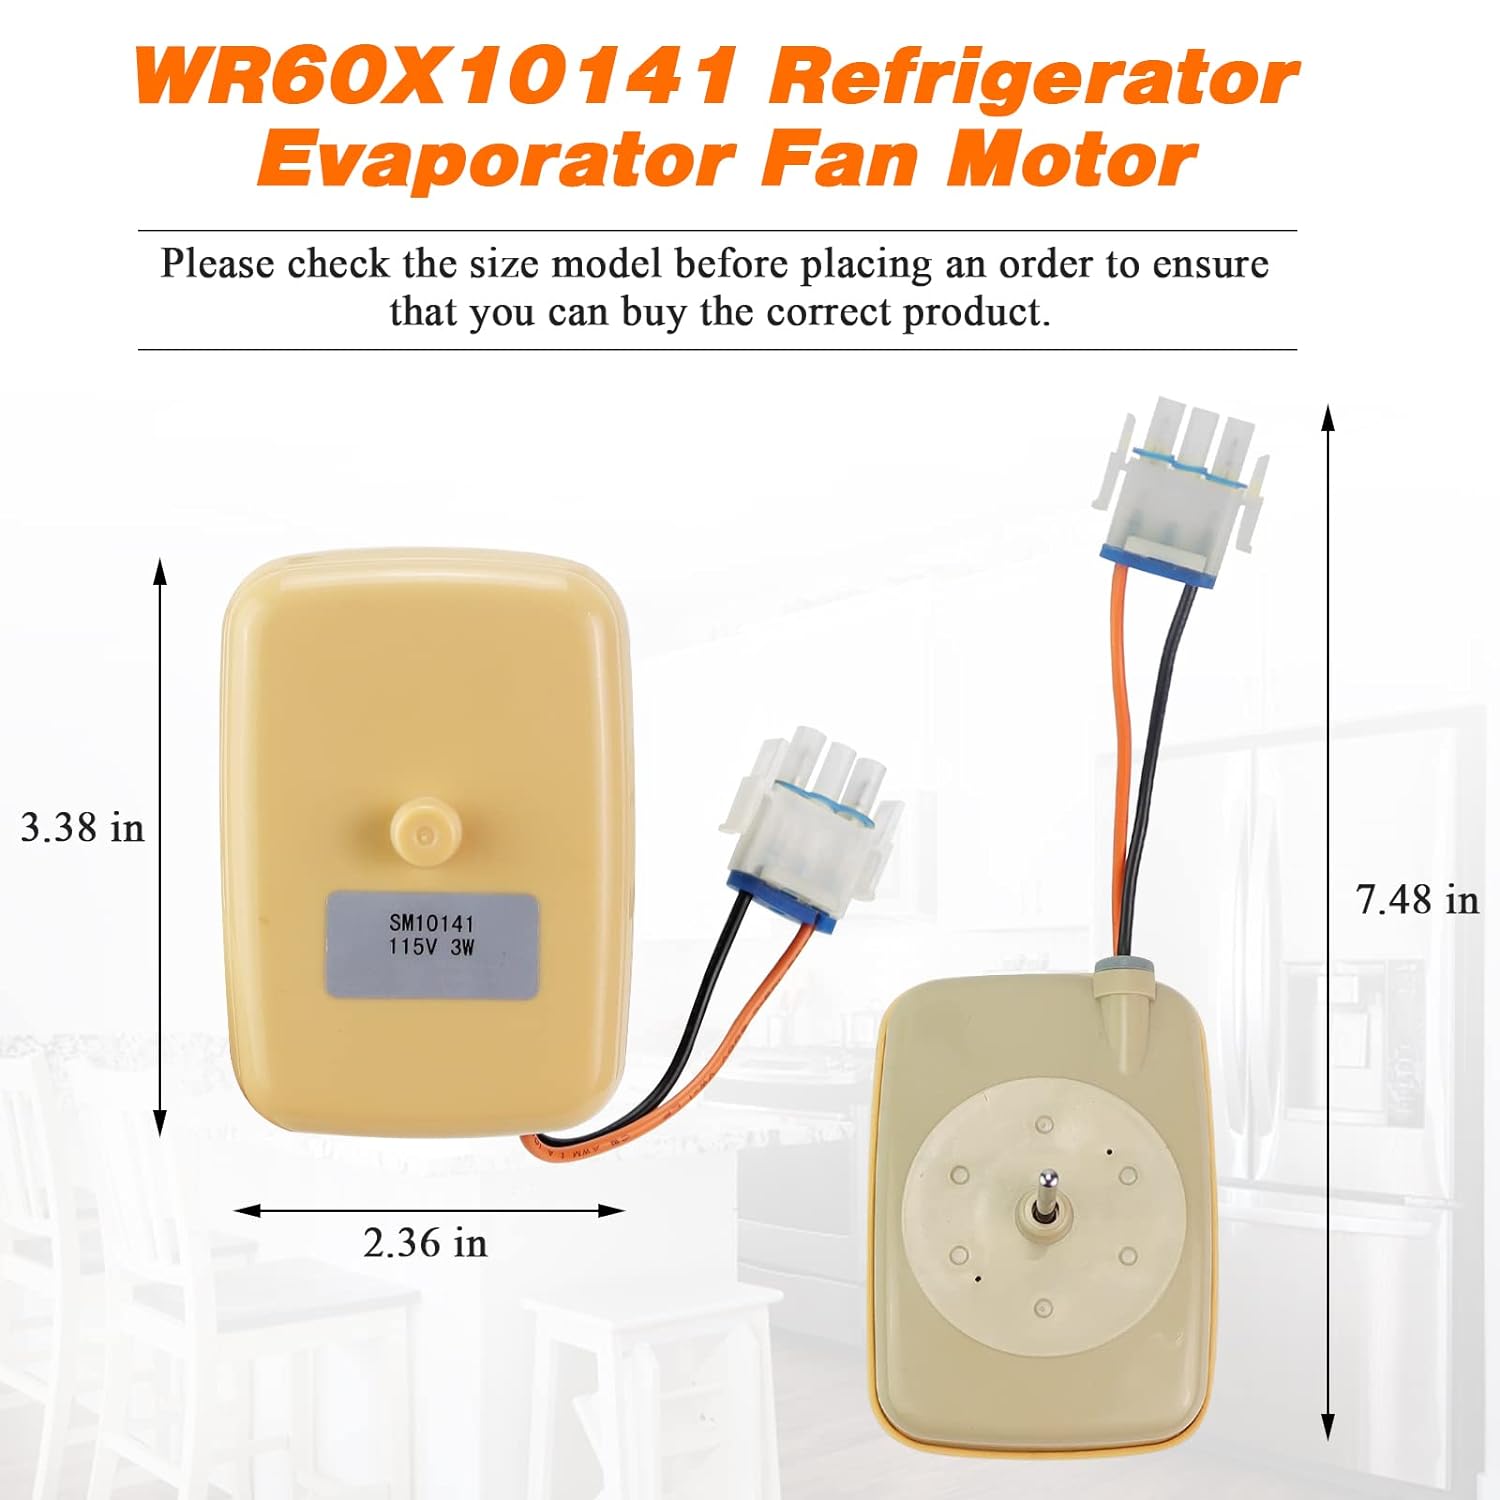 Generic WR60X10141 WR60X10346 Refrigerator Evaporator Fan Motor Blutoget-Compatible with GE Hot-Point Refrigerators-Replaces WR60X10045